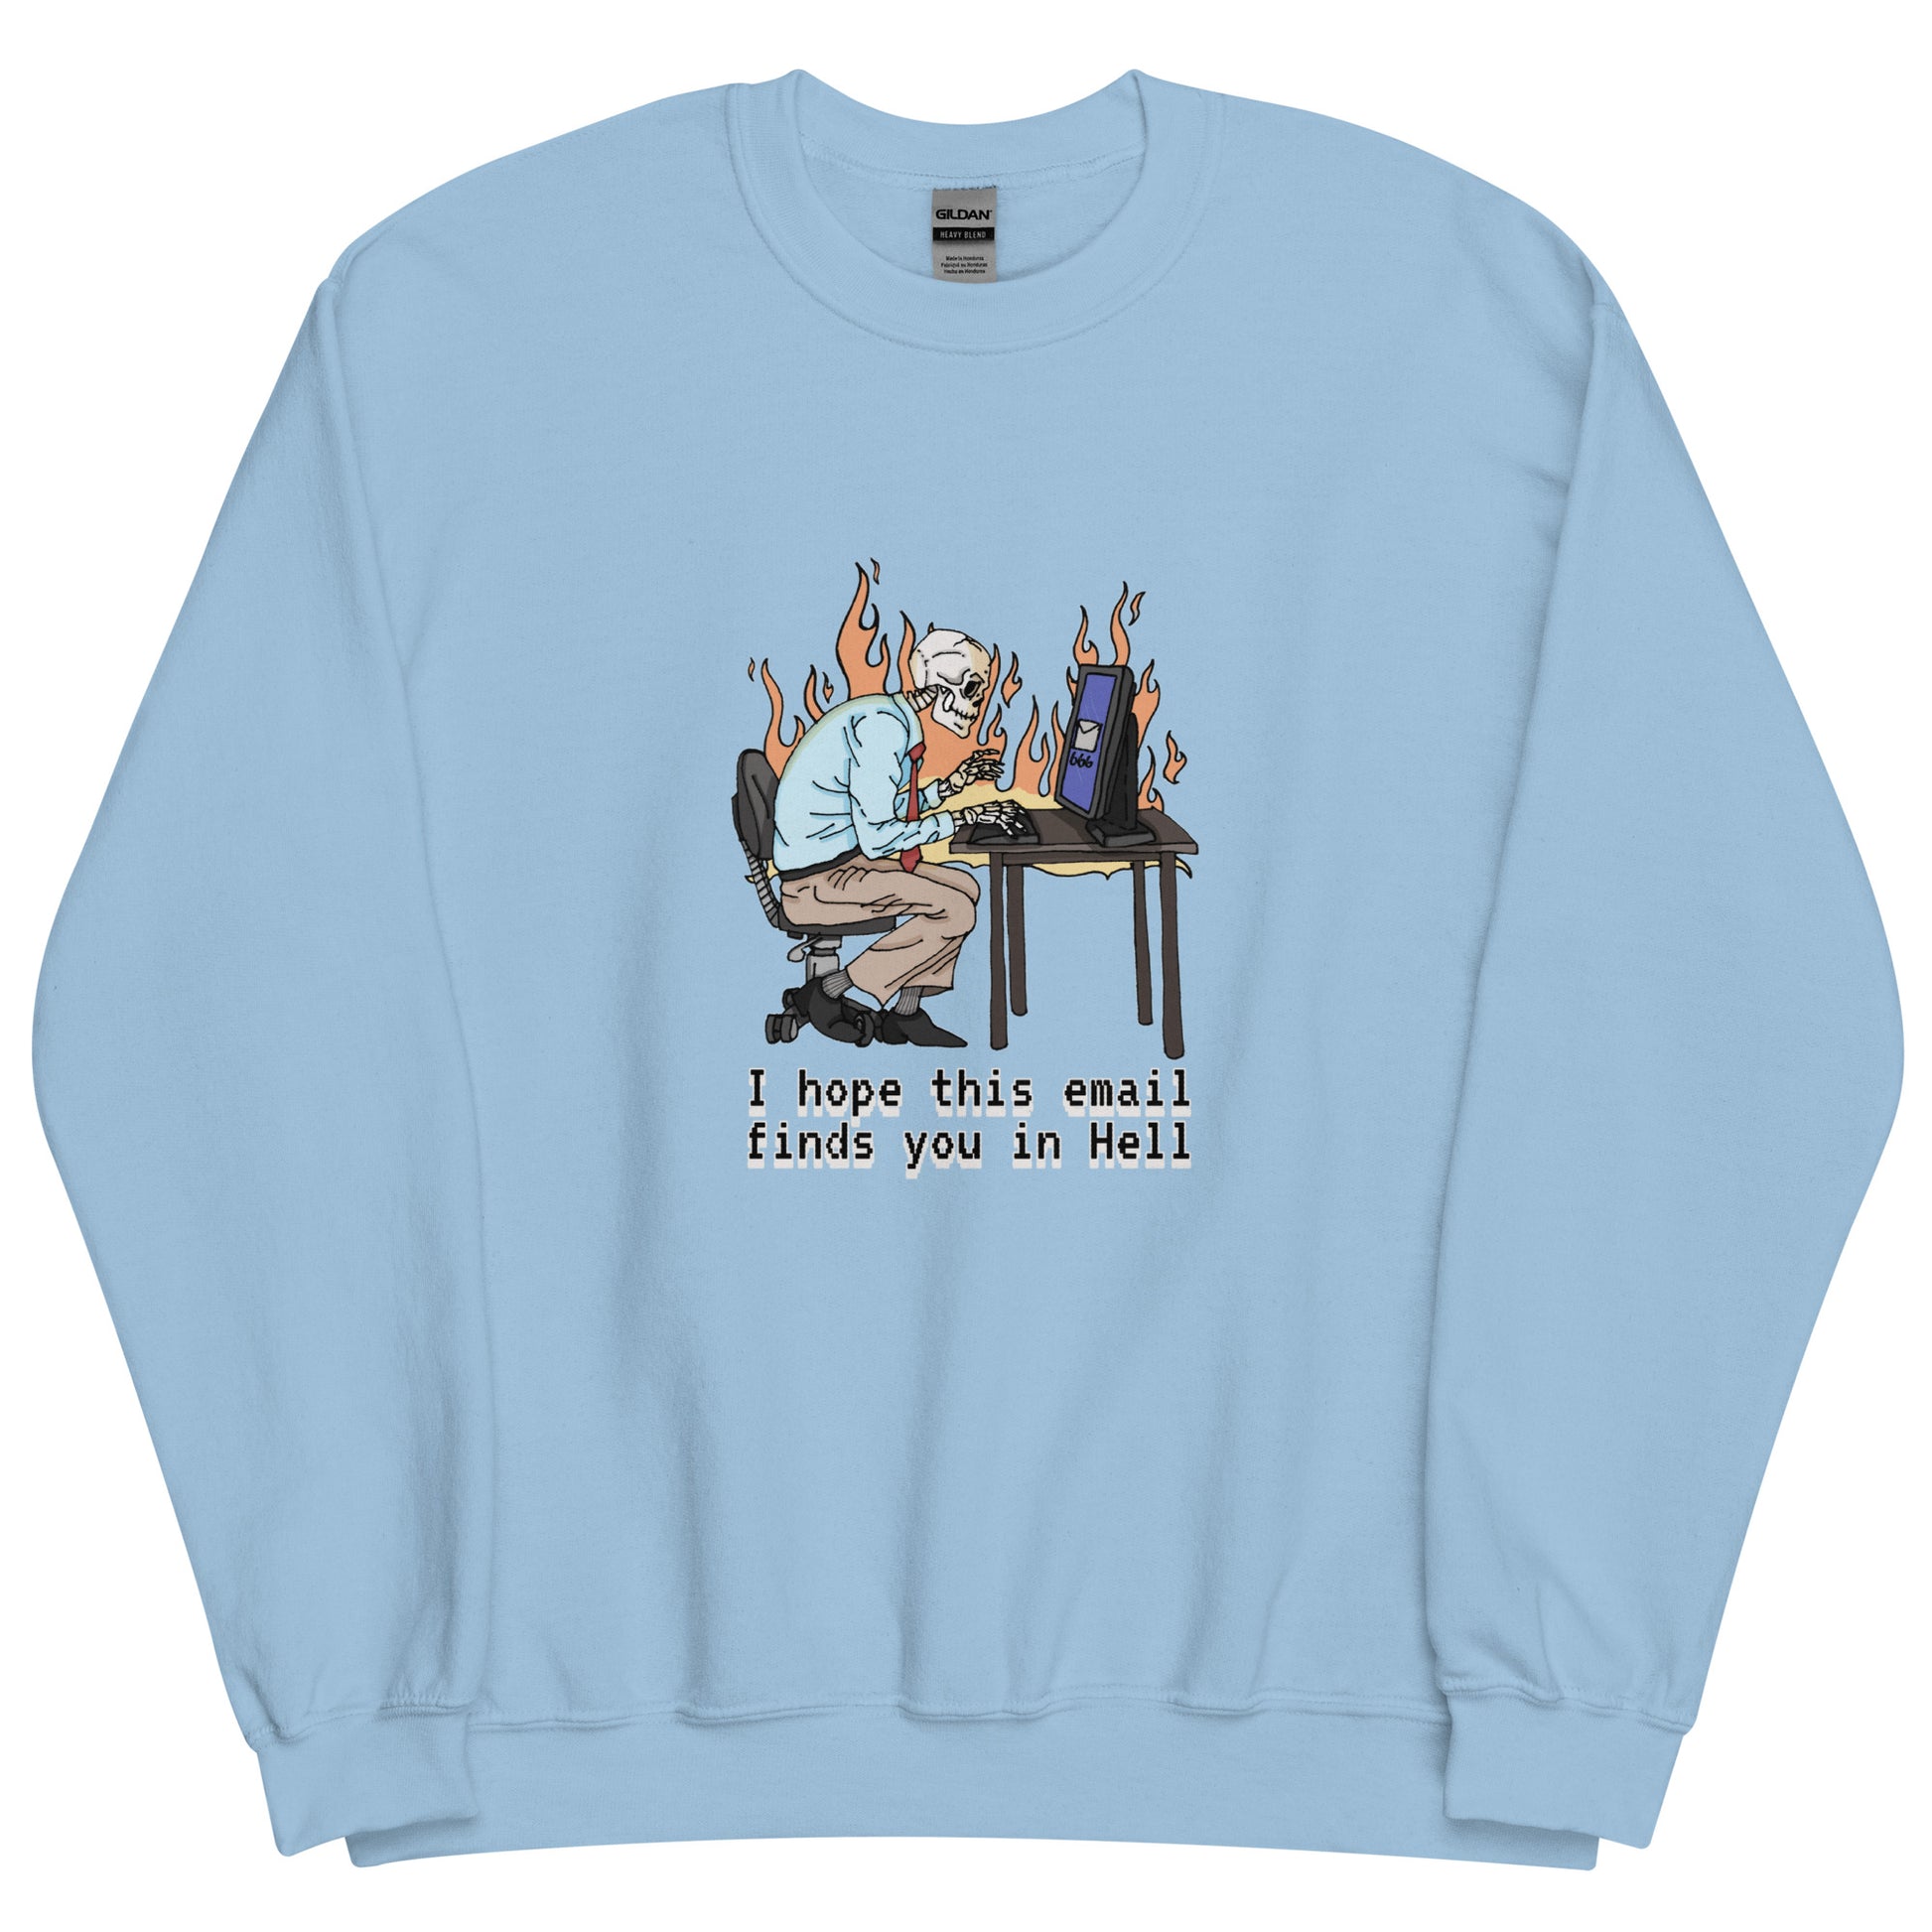 i hope this emails finds you in hell sweatshirt in light blue - gaslit apparel